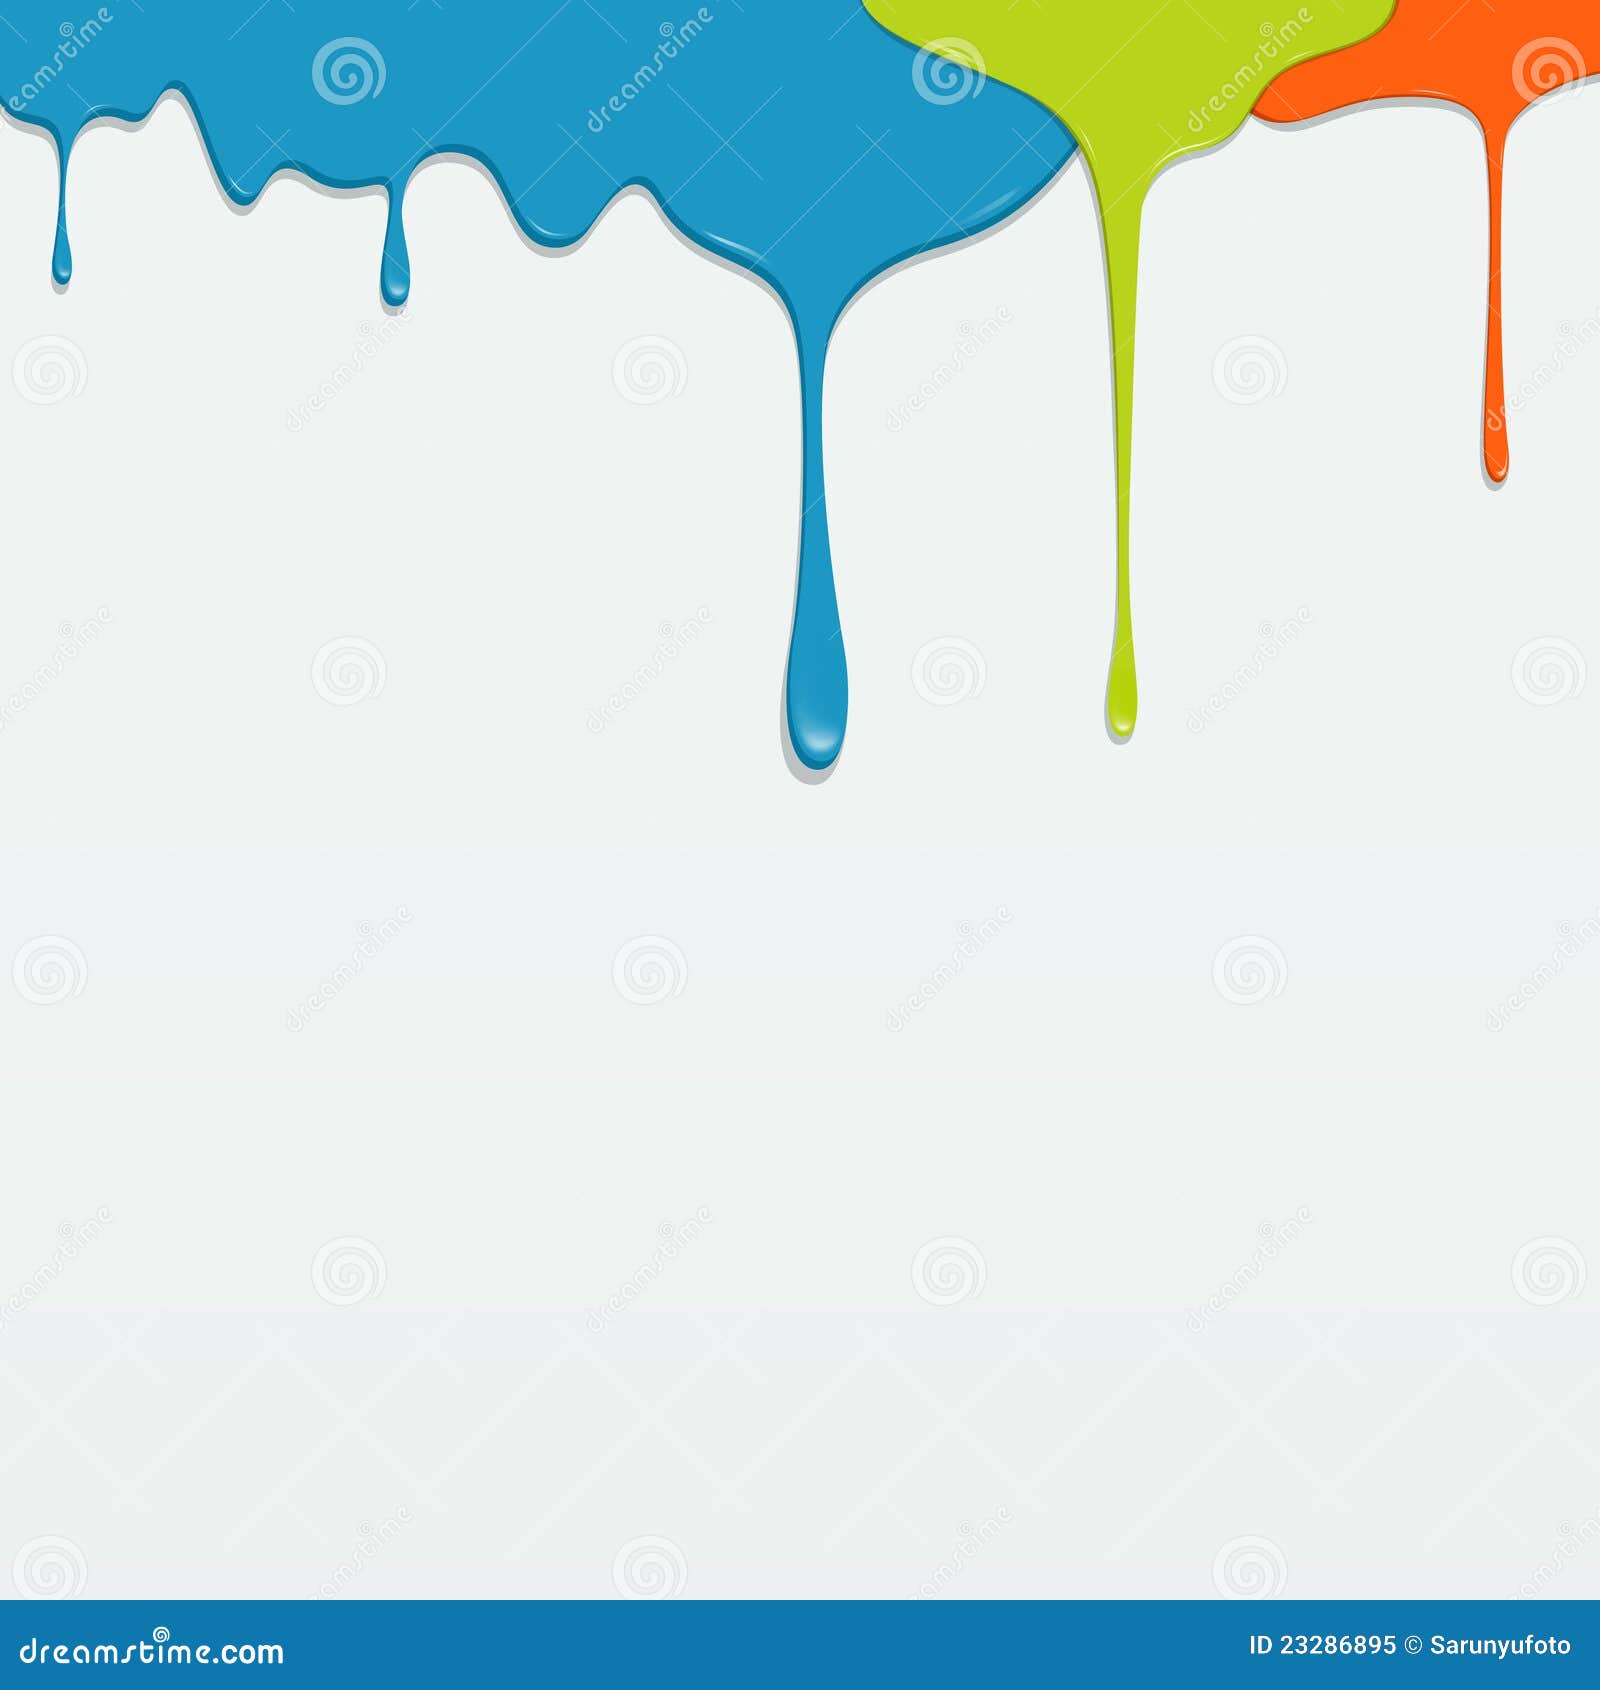 Painting Colorful Dripping Vector Stock Vector - Illustration of pour